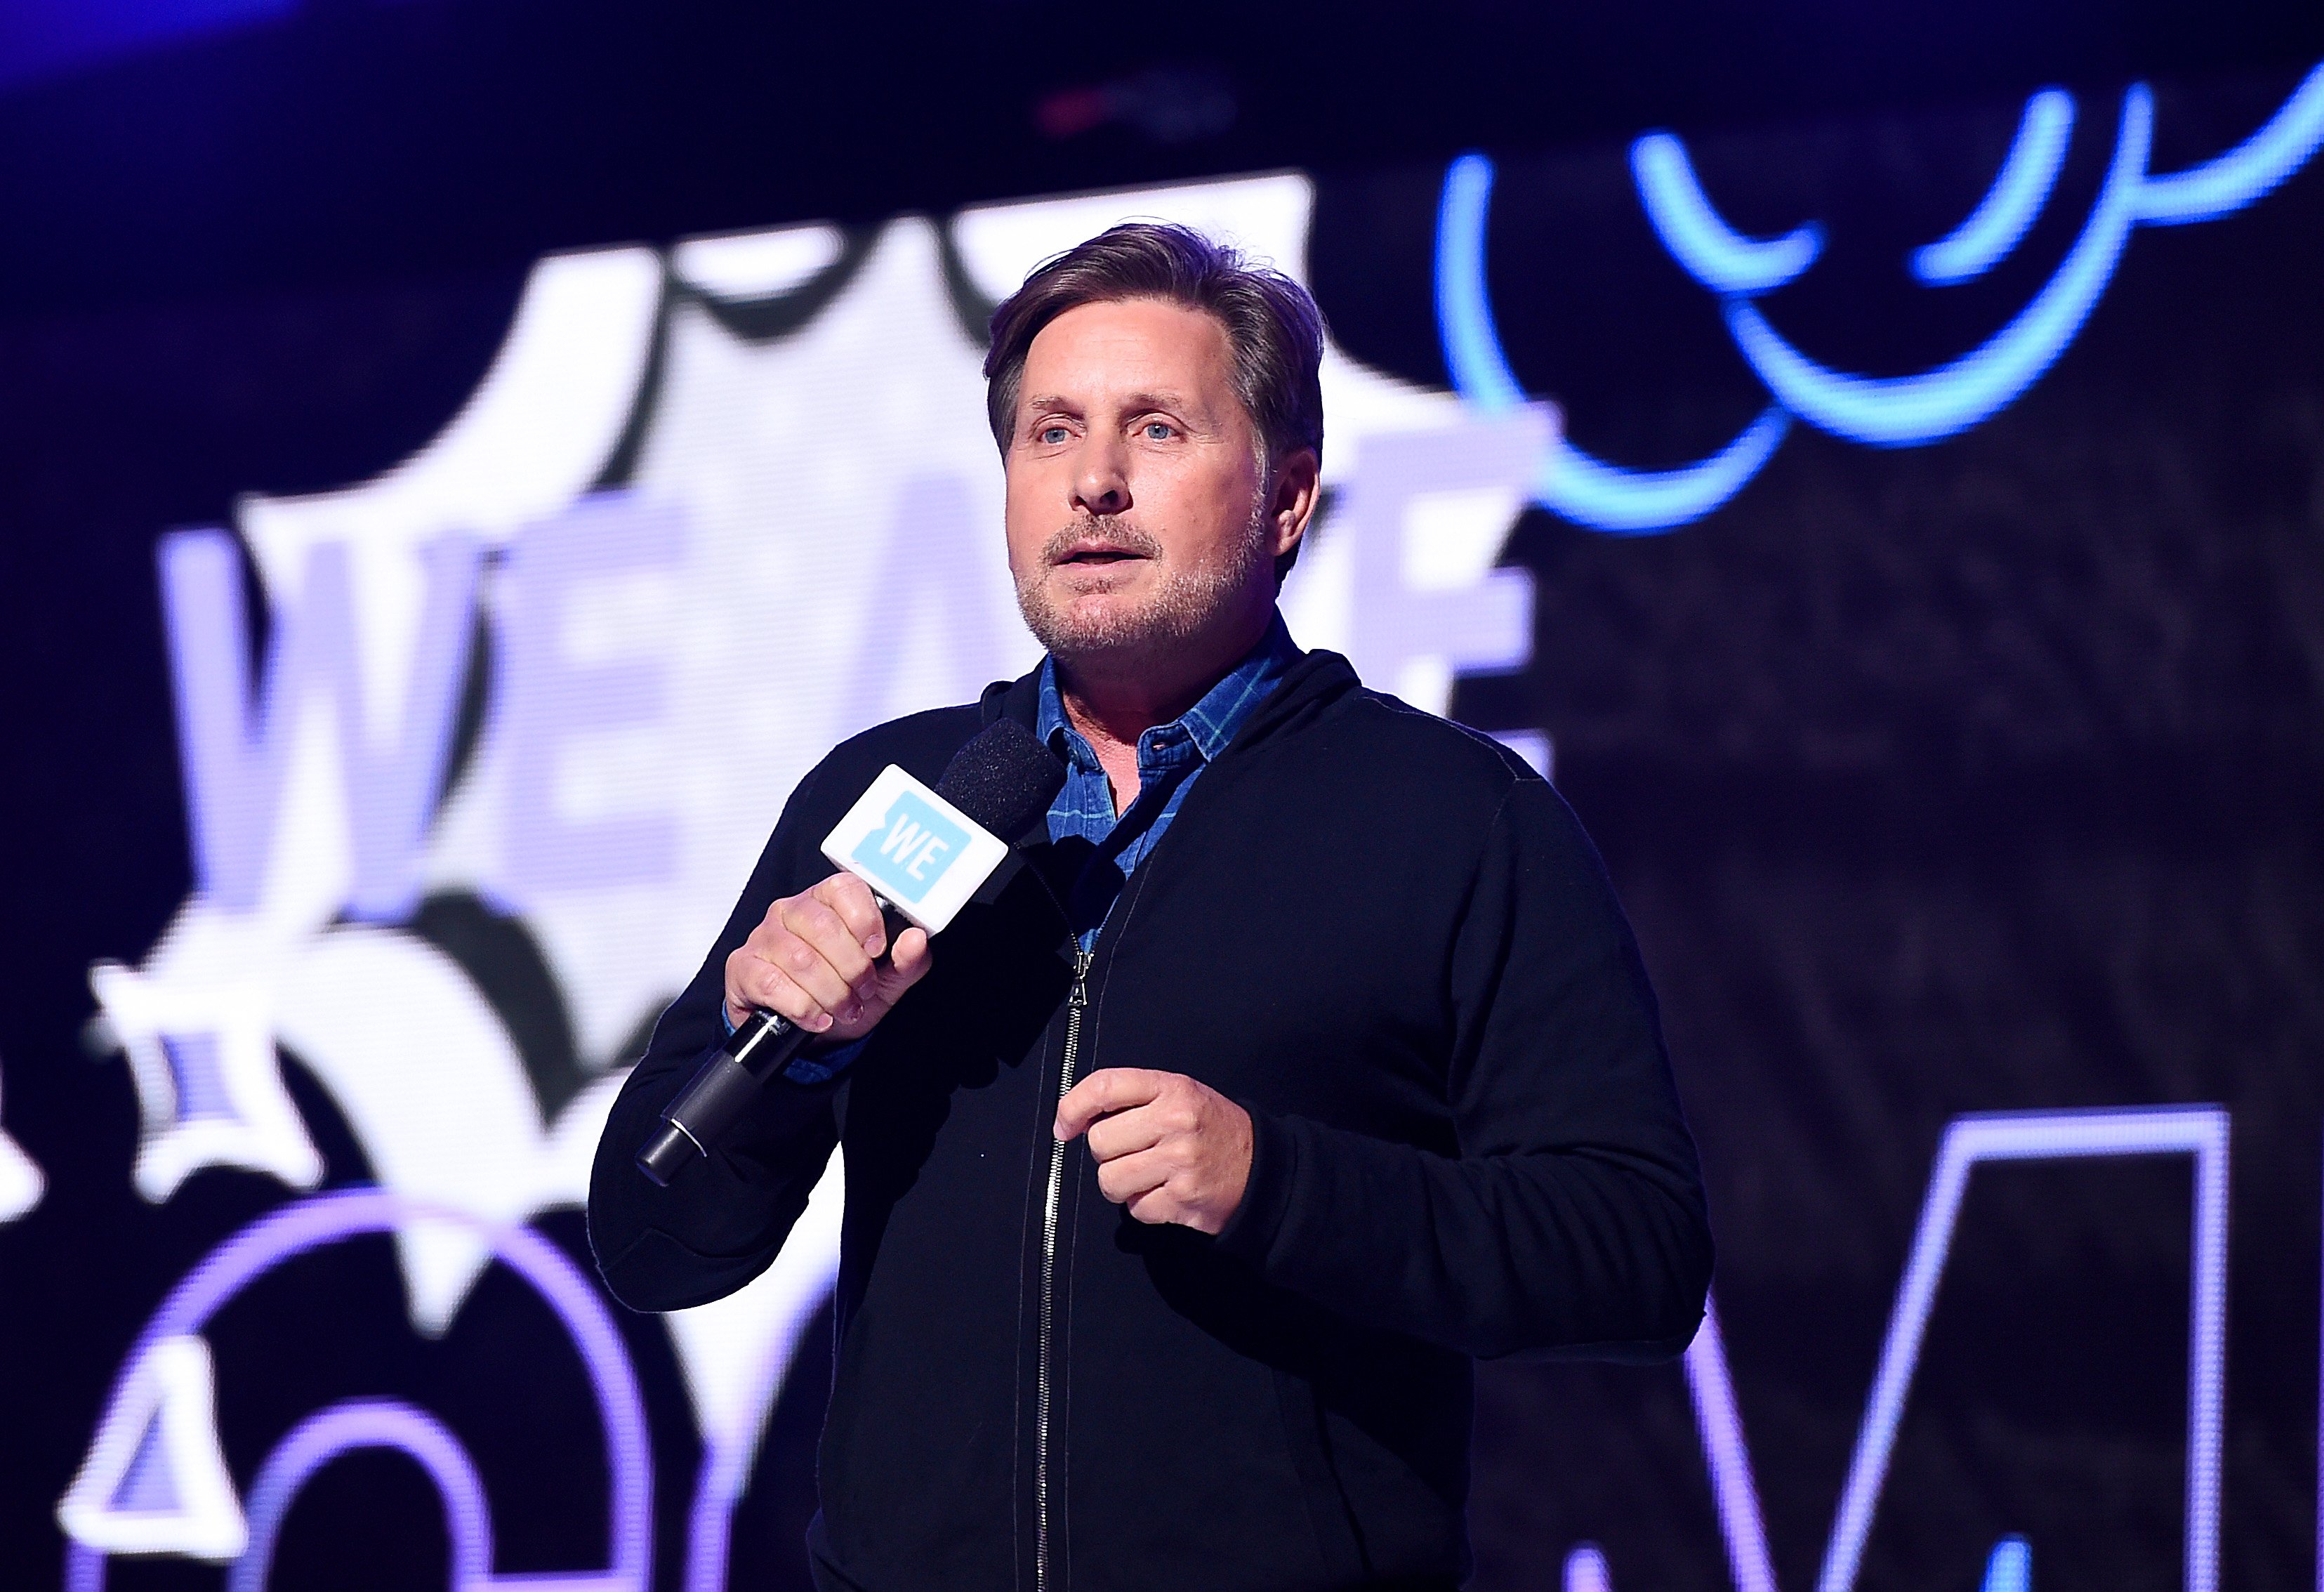 Emilio Estevez speaks onstage during WE Day UN 2019 at Barclays Center on September 25, 2019, in New York City. | Source: Getty Images